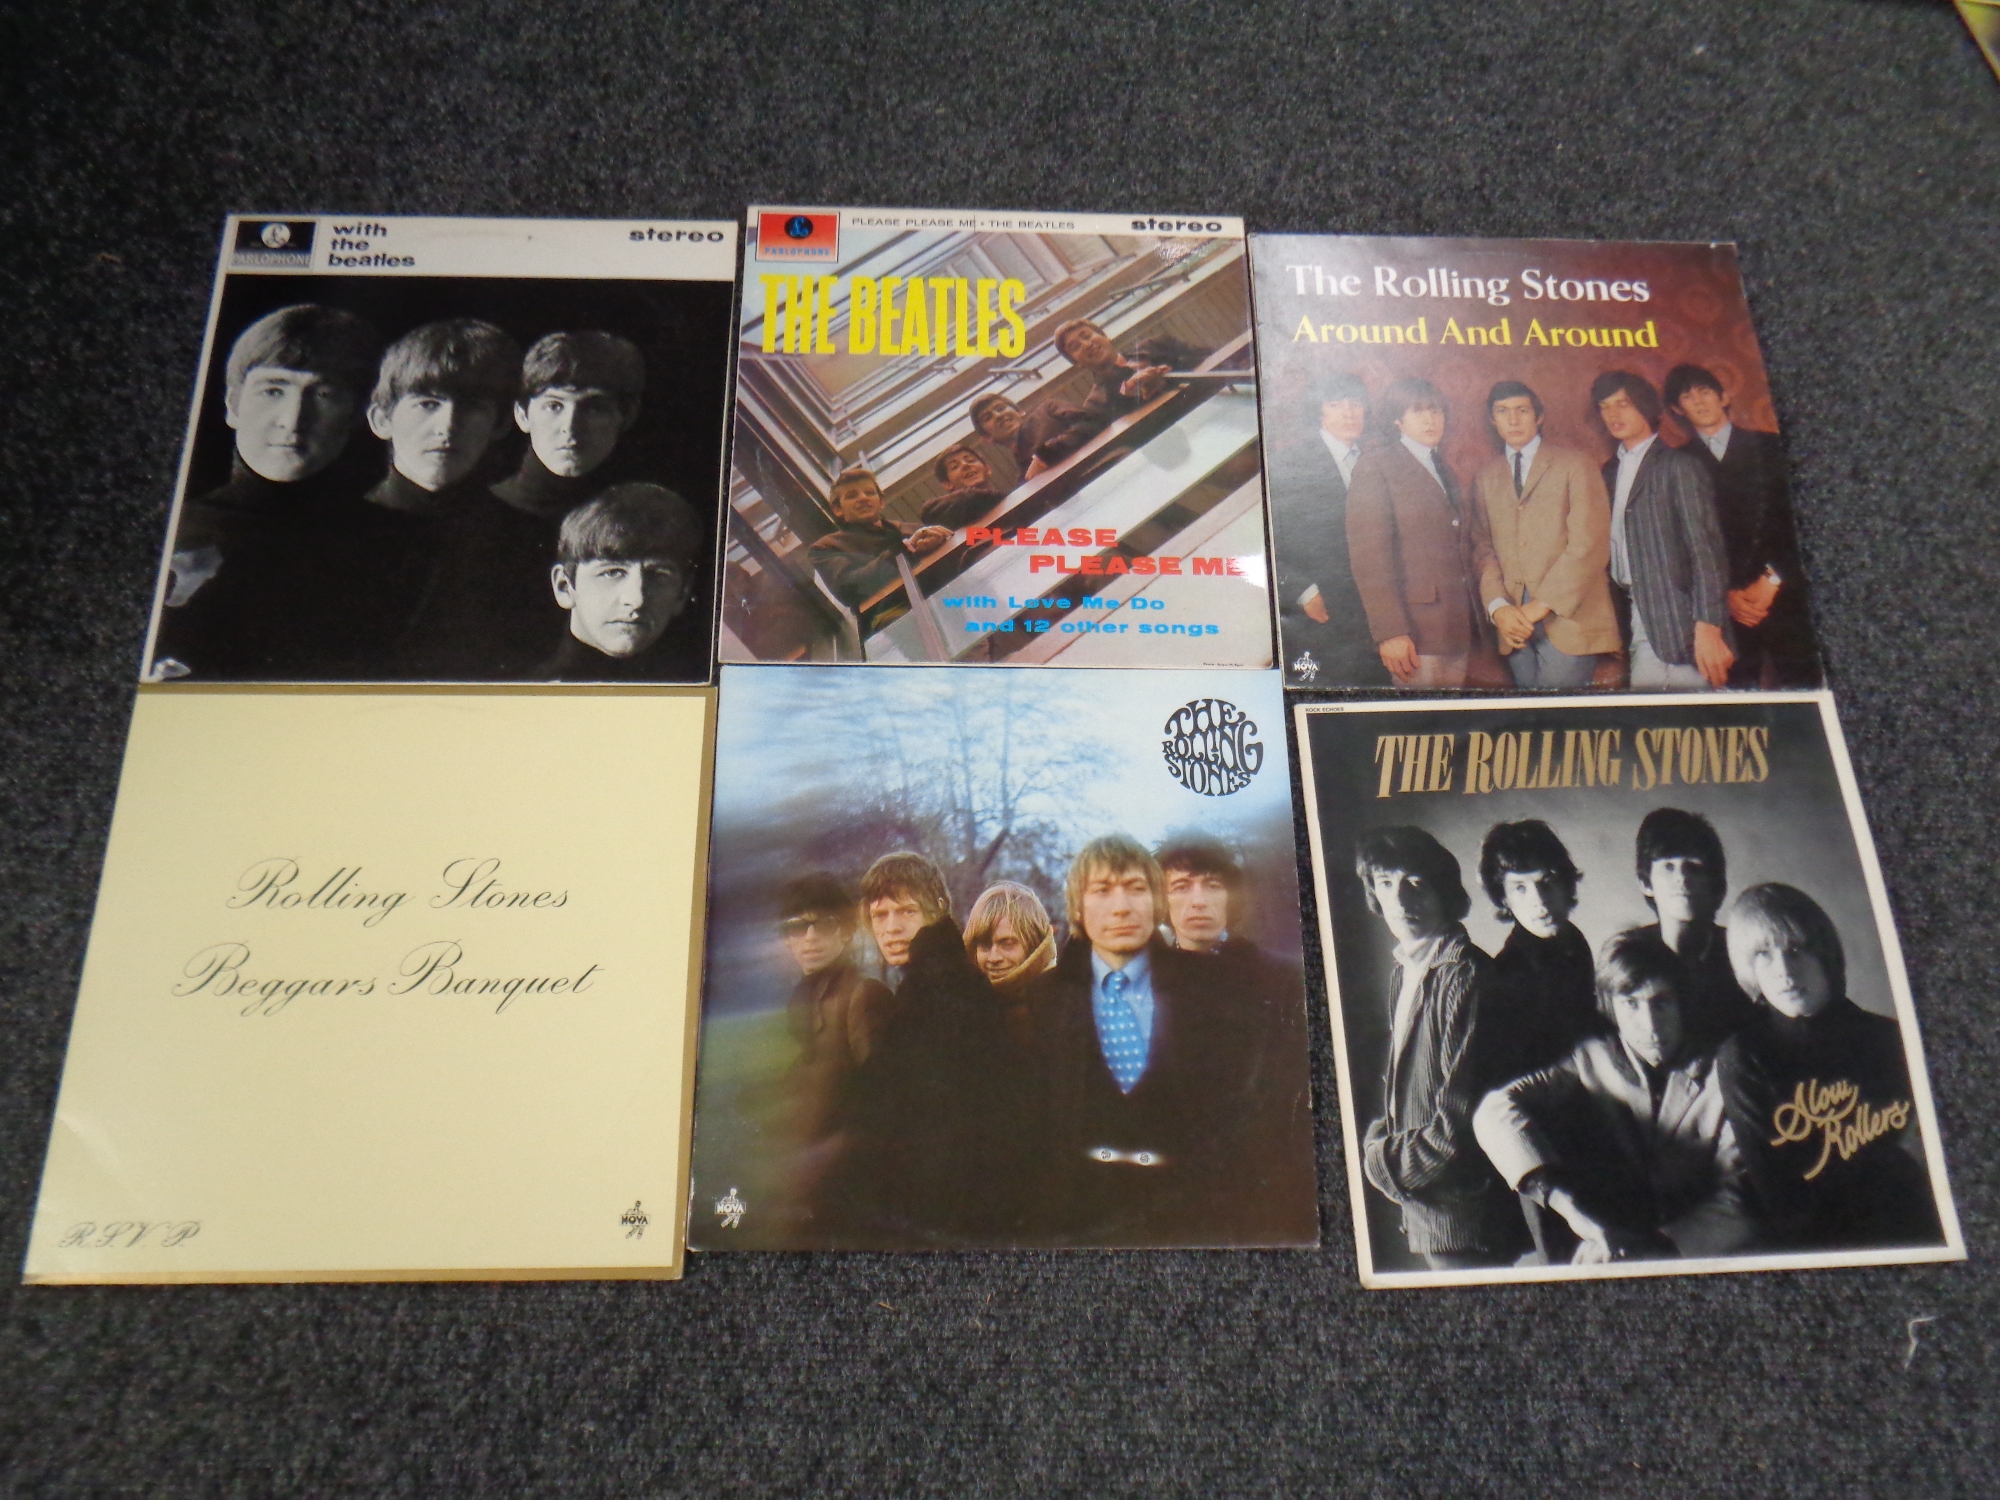 A box of a large quantity of vinyl LP's to include many albums by The Beatles, The Rolling Stones, - Image 4 of 9